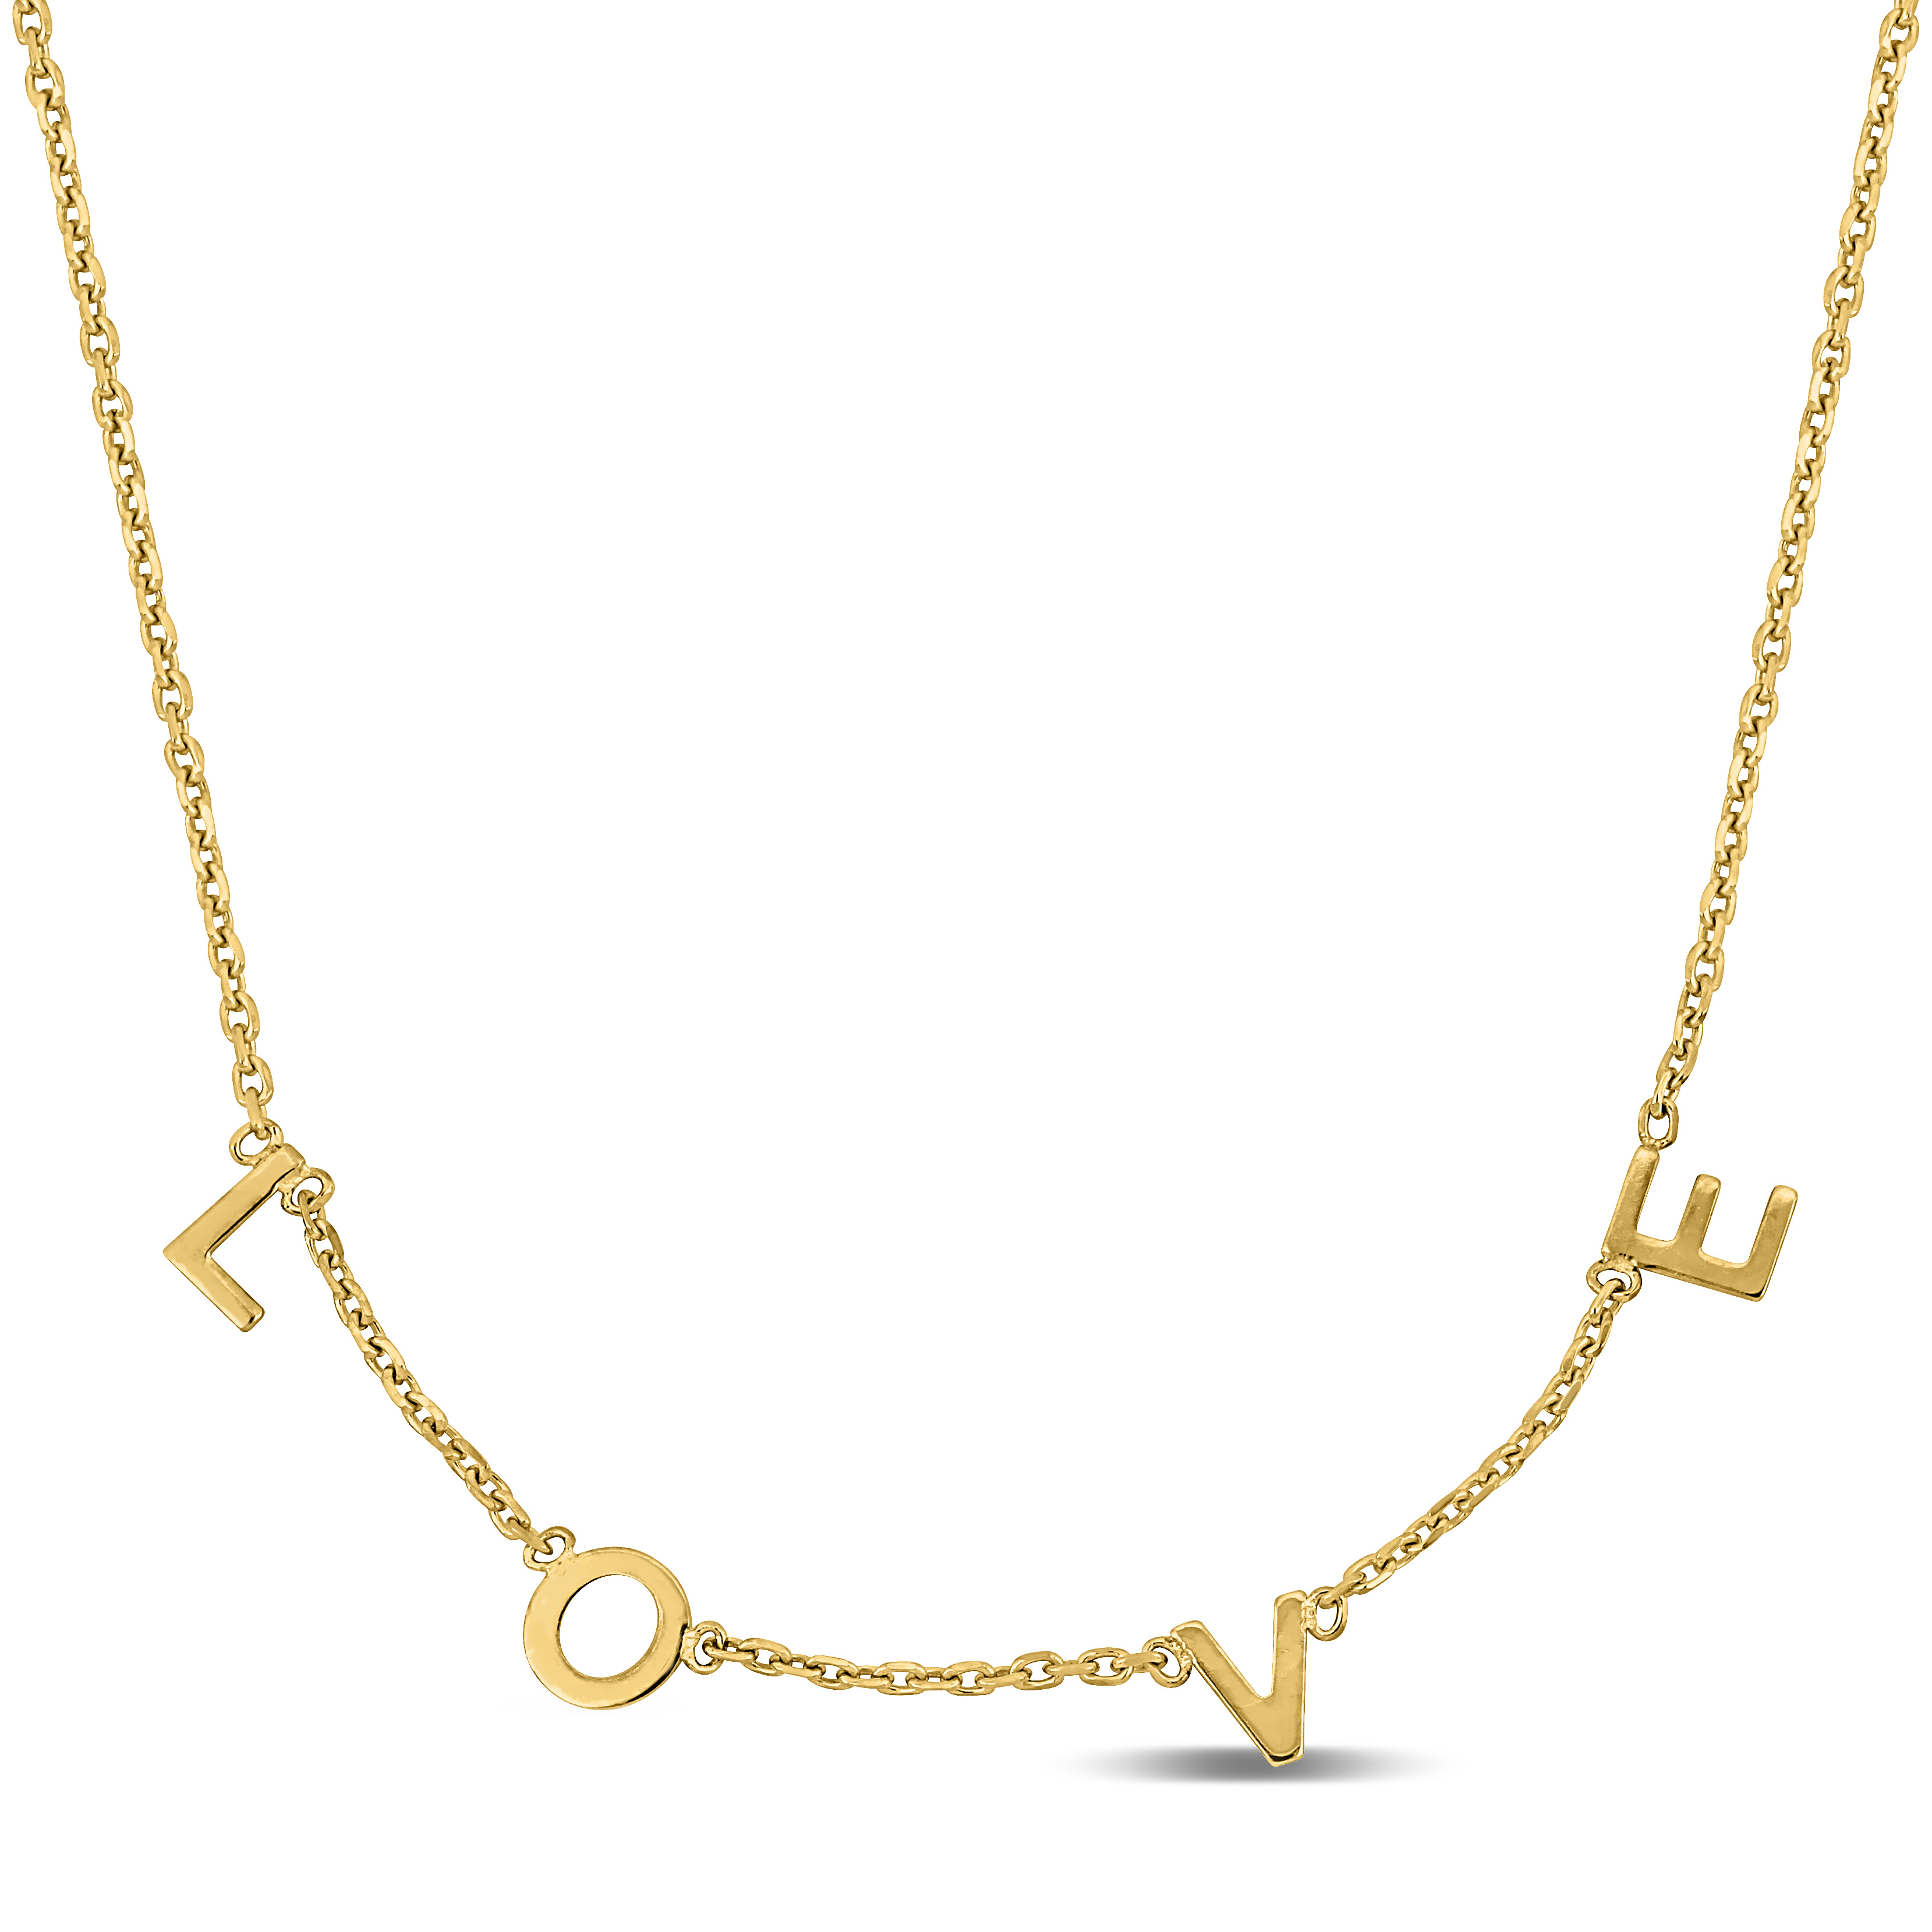 "LOVE" Necklace with Chain in 14k Yellow Gold - 16.5+1 in.